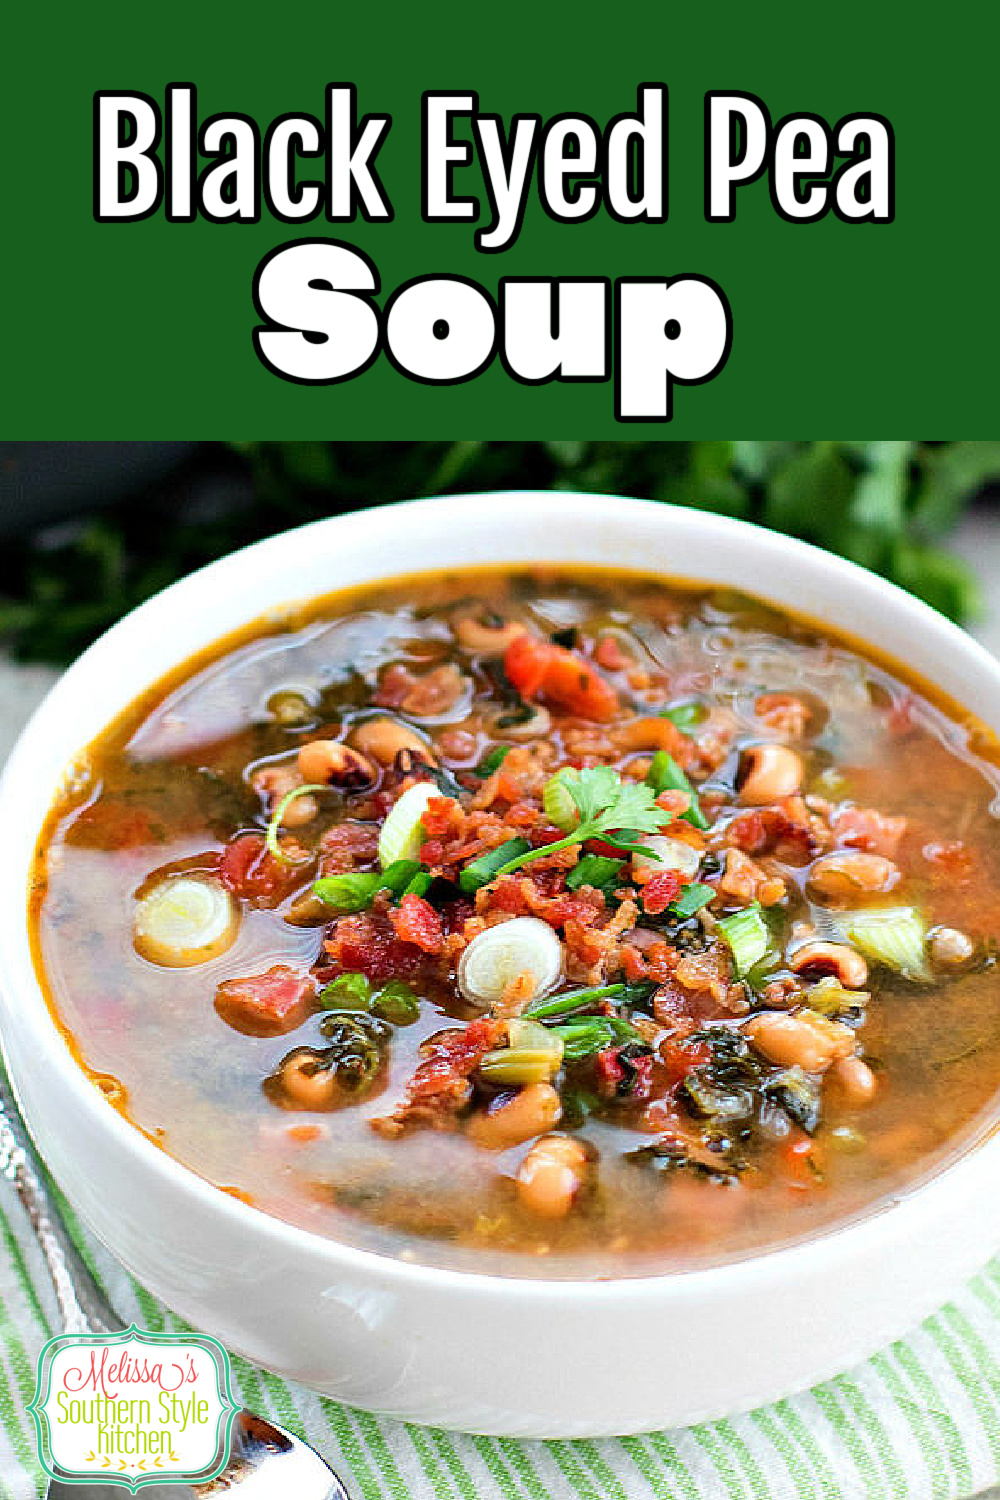 Enjoy a warm and cozy bowl of Black Eyed Pea Soup for your New Year's Day celebration #blackeyedpeas #soup #blackeyedpeasoup #souprecipes #bestsouprecipes #newyearsdayrecipes #southernfood #southernrecipes #dinner #dinnerrecipes